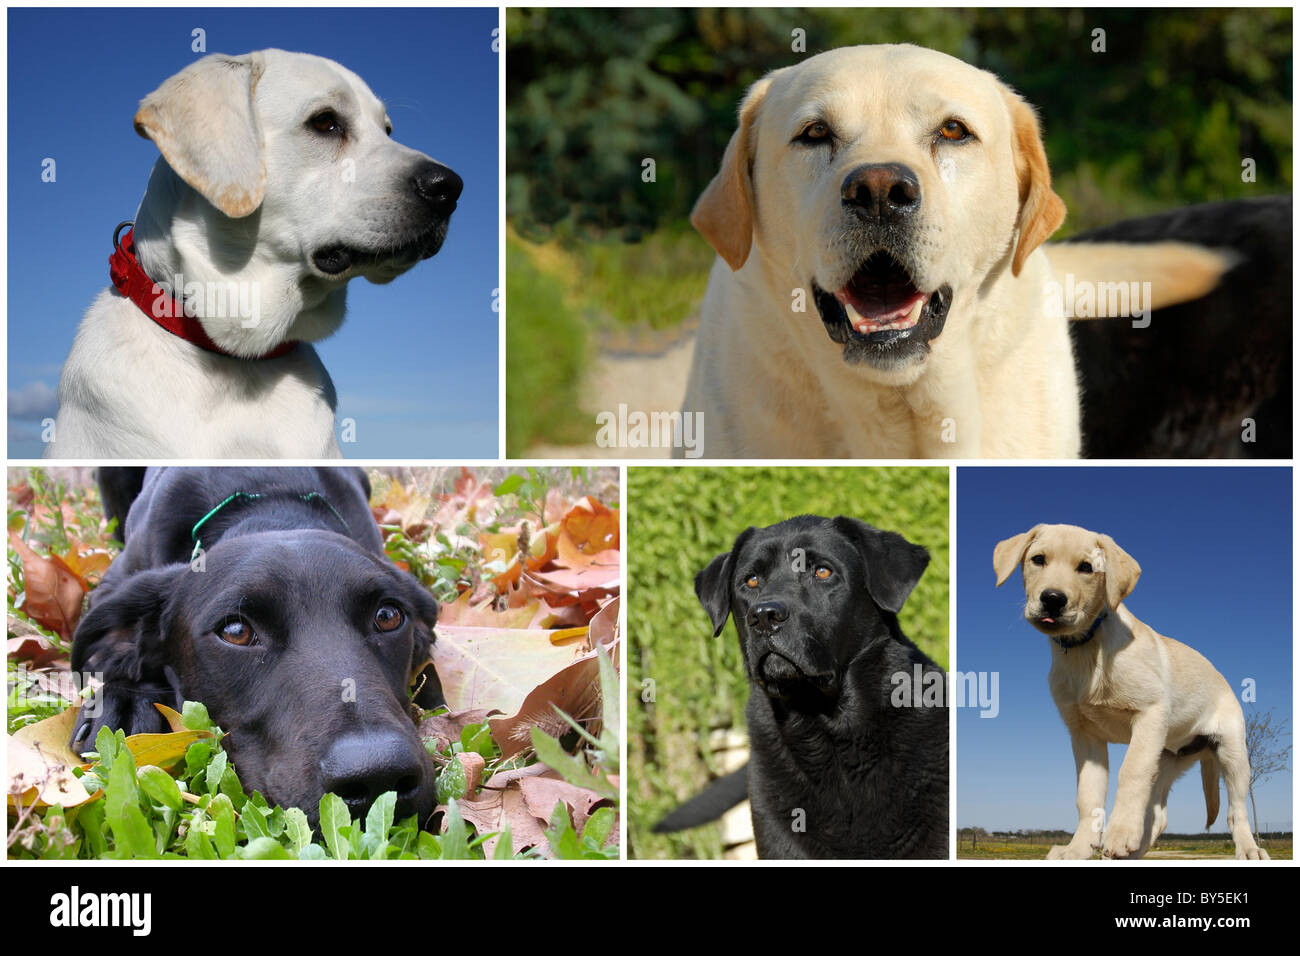 composite picture with purebred dogs and puppy labrador retriever Stock Photo